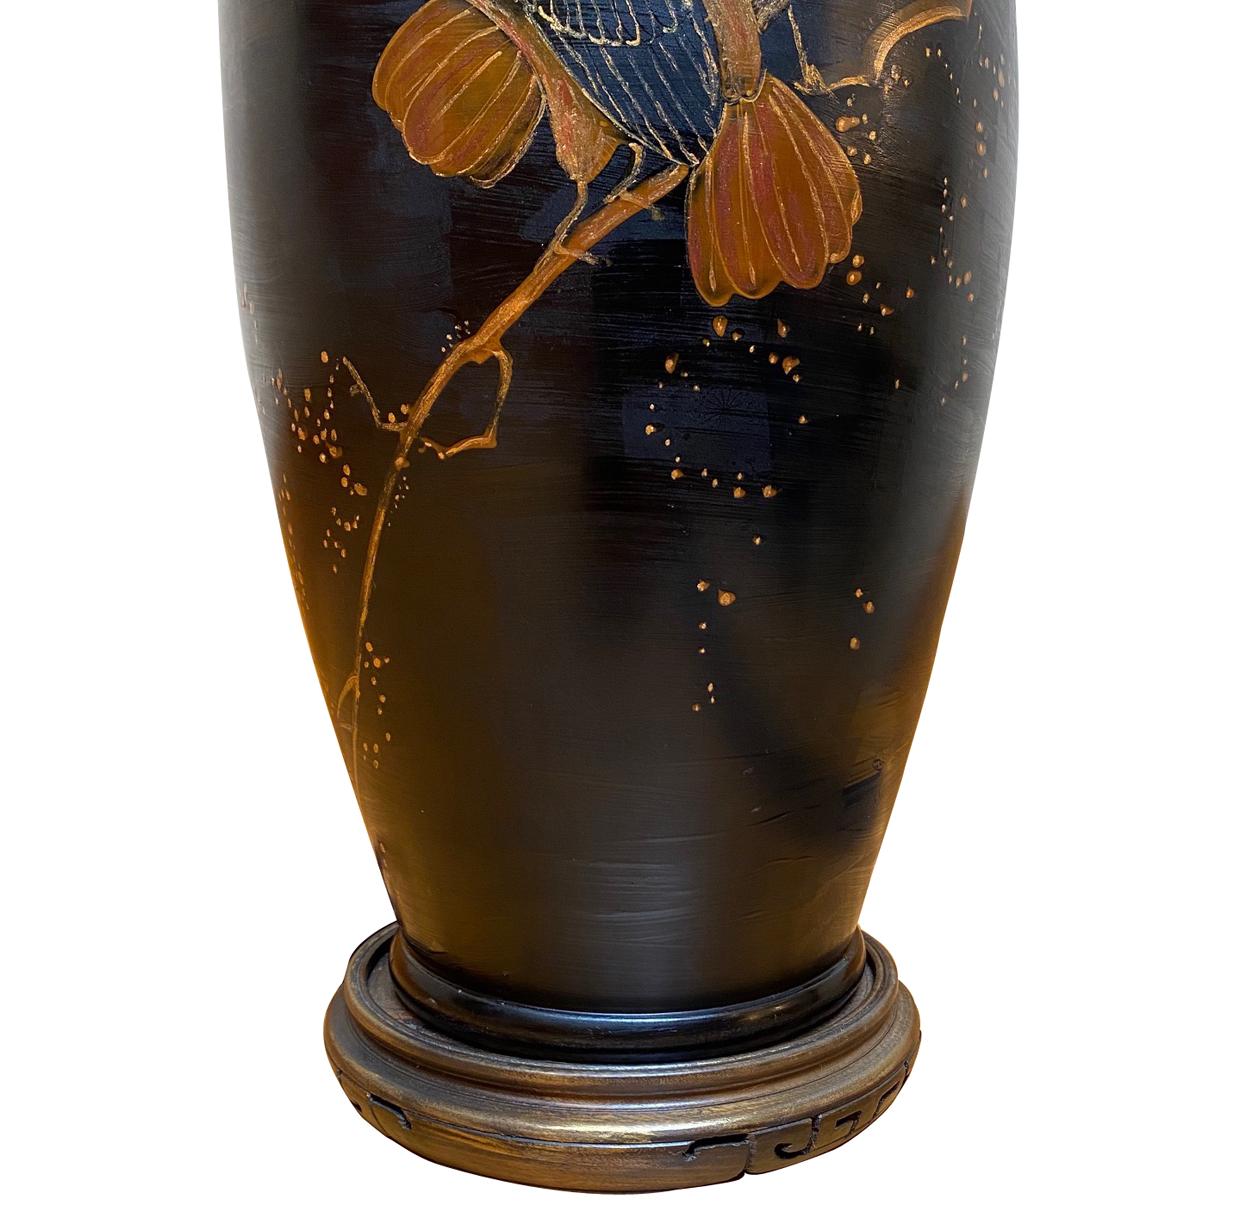 A circa 1920's antique Japanese porcelain vase with hand painted bird motif mounted as table lamp.

Measurements:
Height of body: 14.5